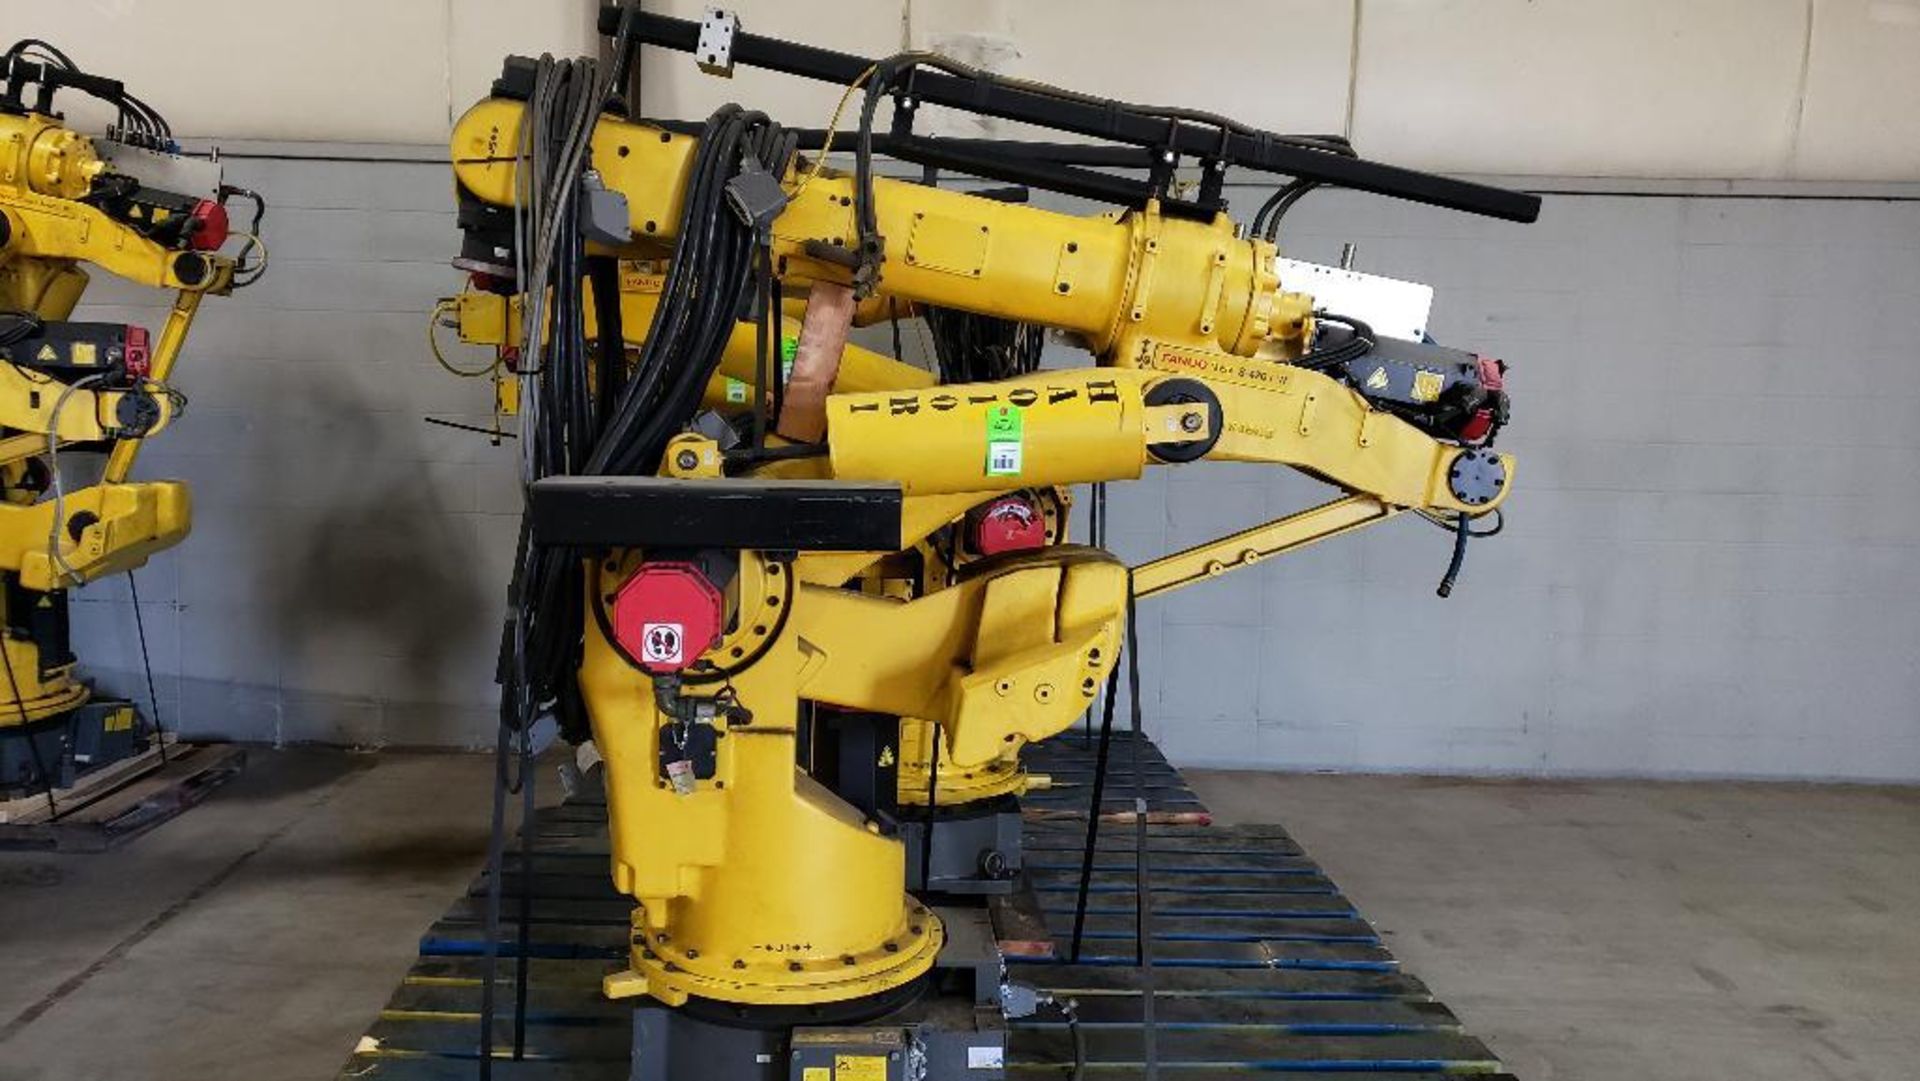 Fanuc S-420iW robot 6-axis arm.